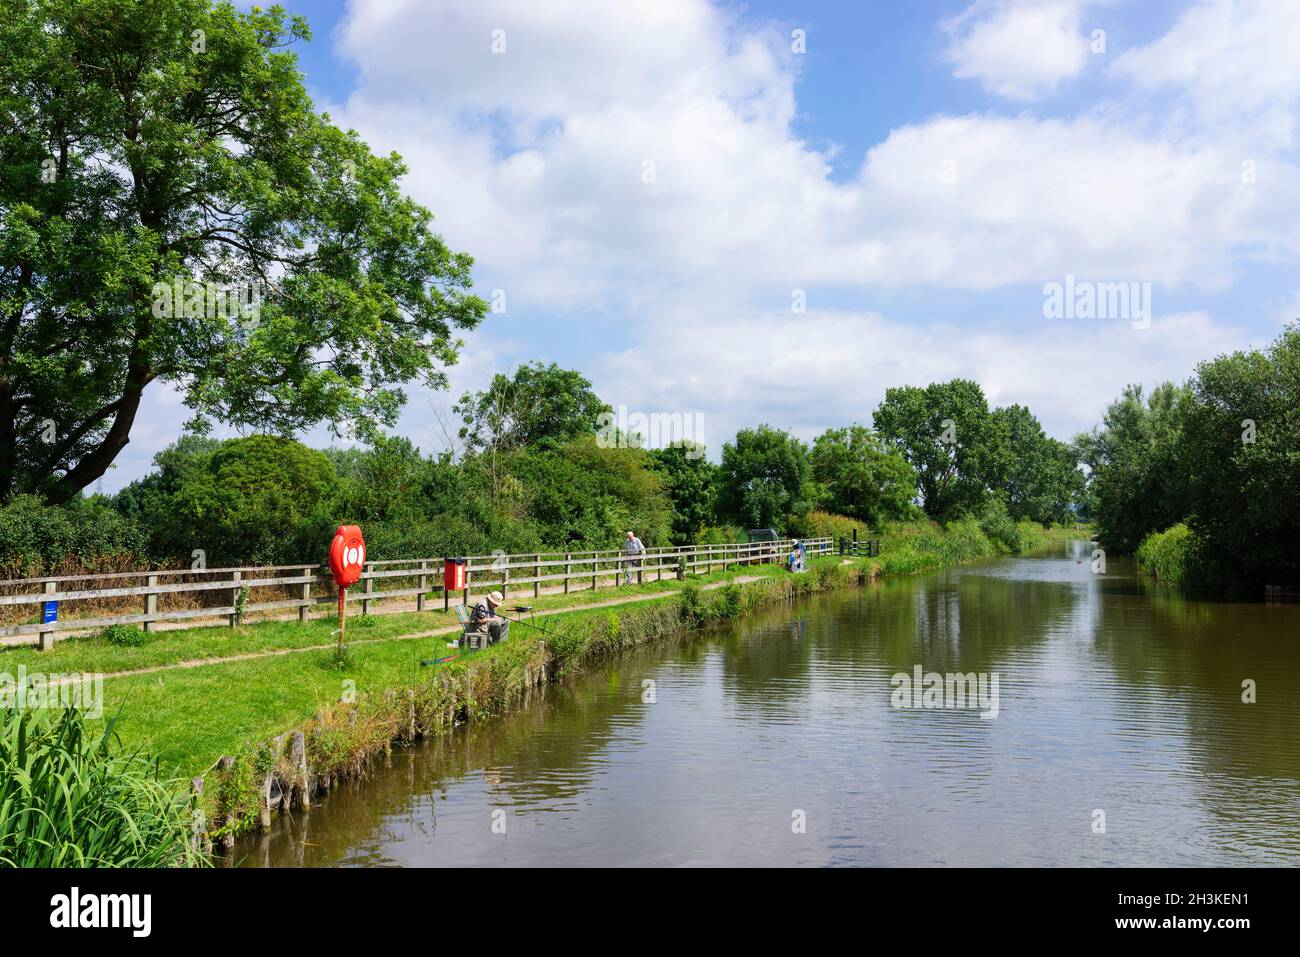 Fisherman fishing at Hickling Basin on the Grantham Canal Leicestershire England UK GB Europe Stock Photo